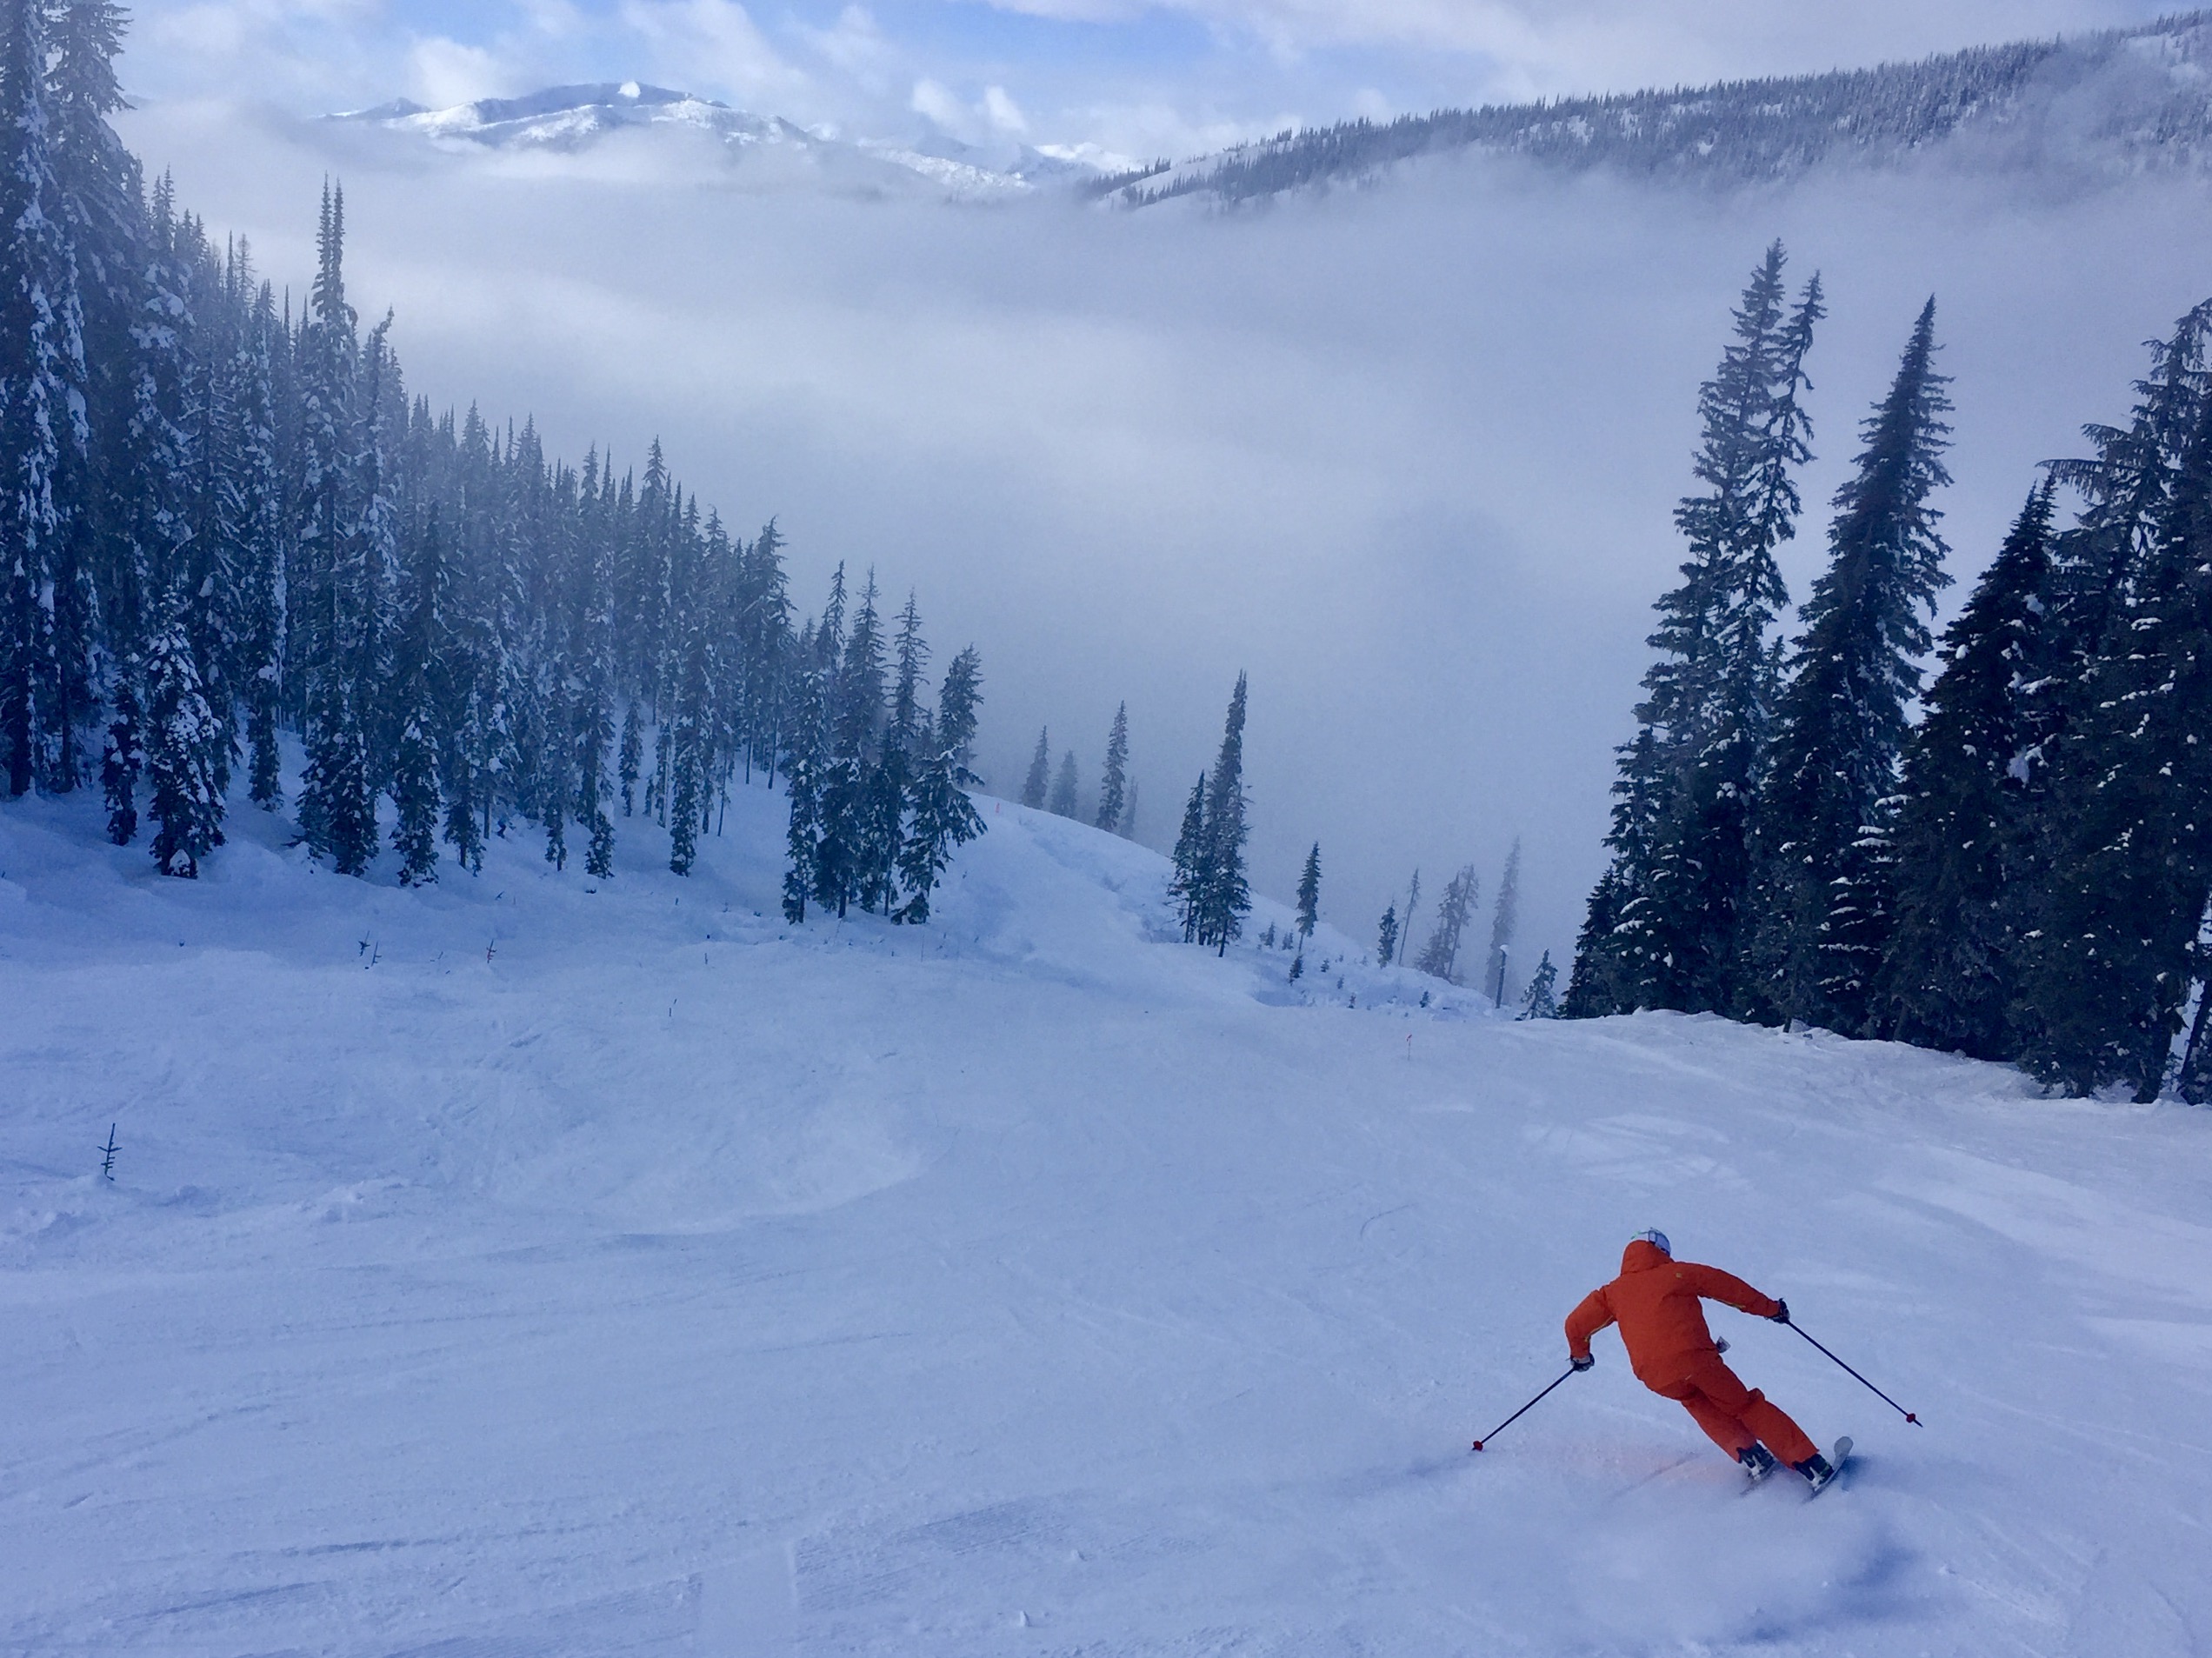 Carving into the clouds on the sweet snow on the backside of the mountain. 